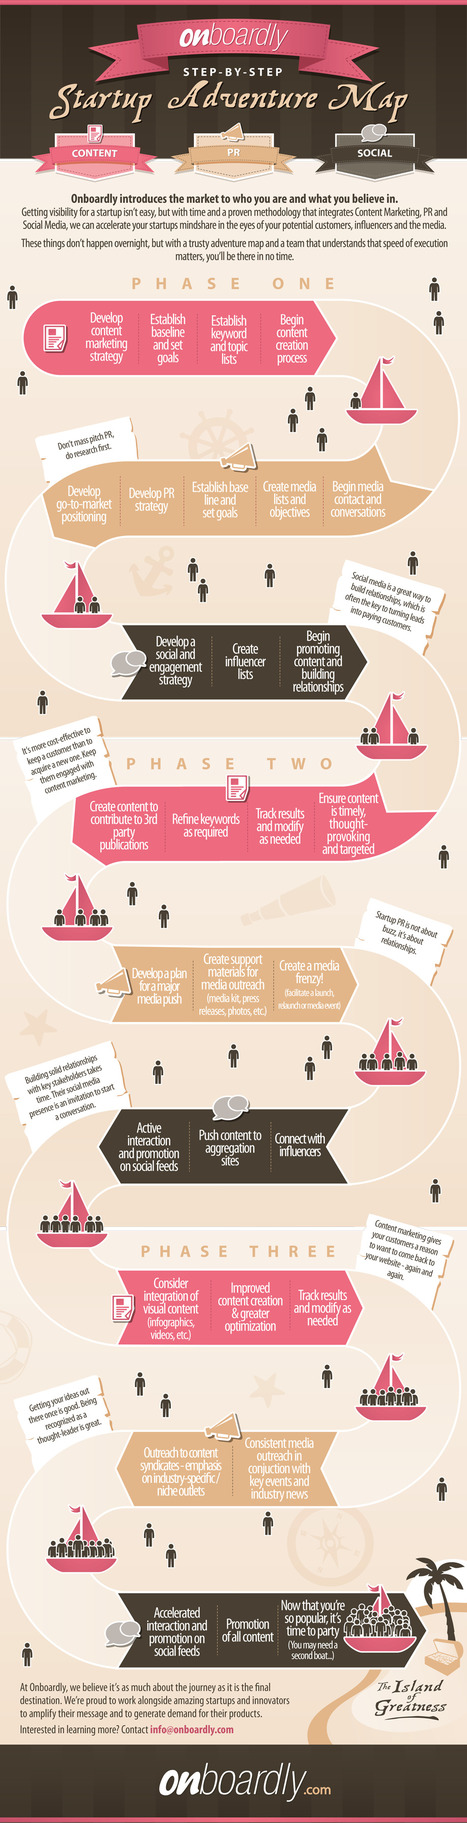 Steps On How to Acquire Customers For Your Startup [INFOGRAPHIC] | | MarketingHits | Scoop.it